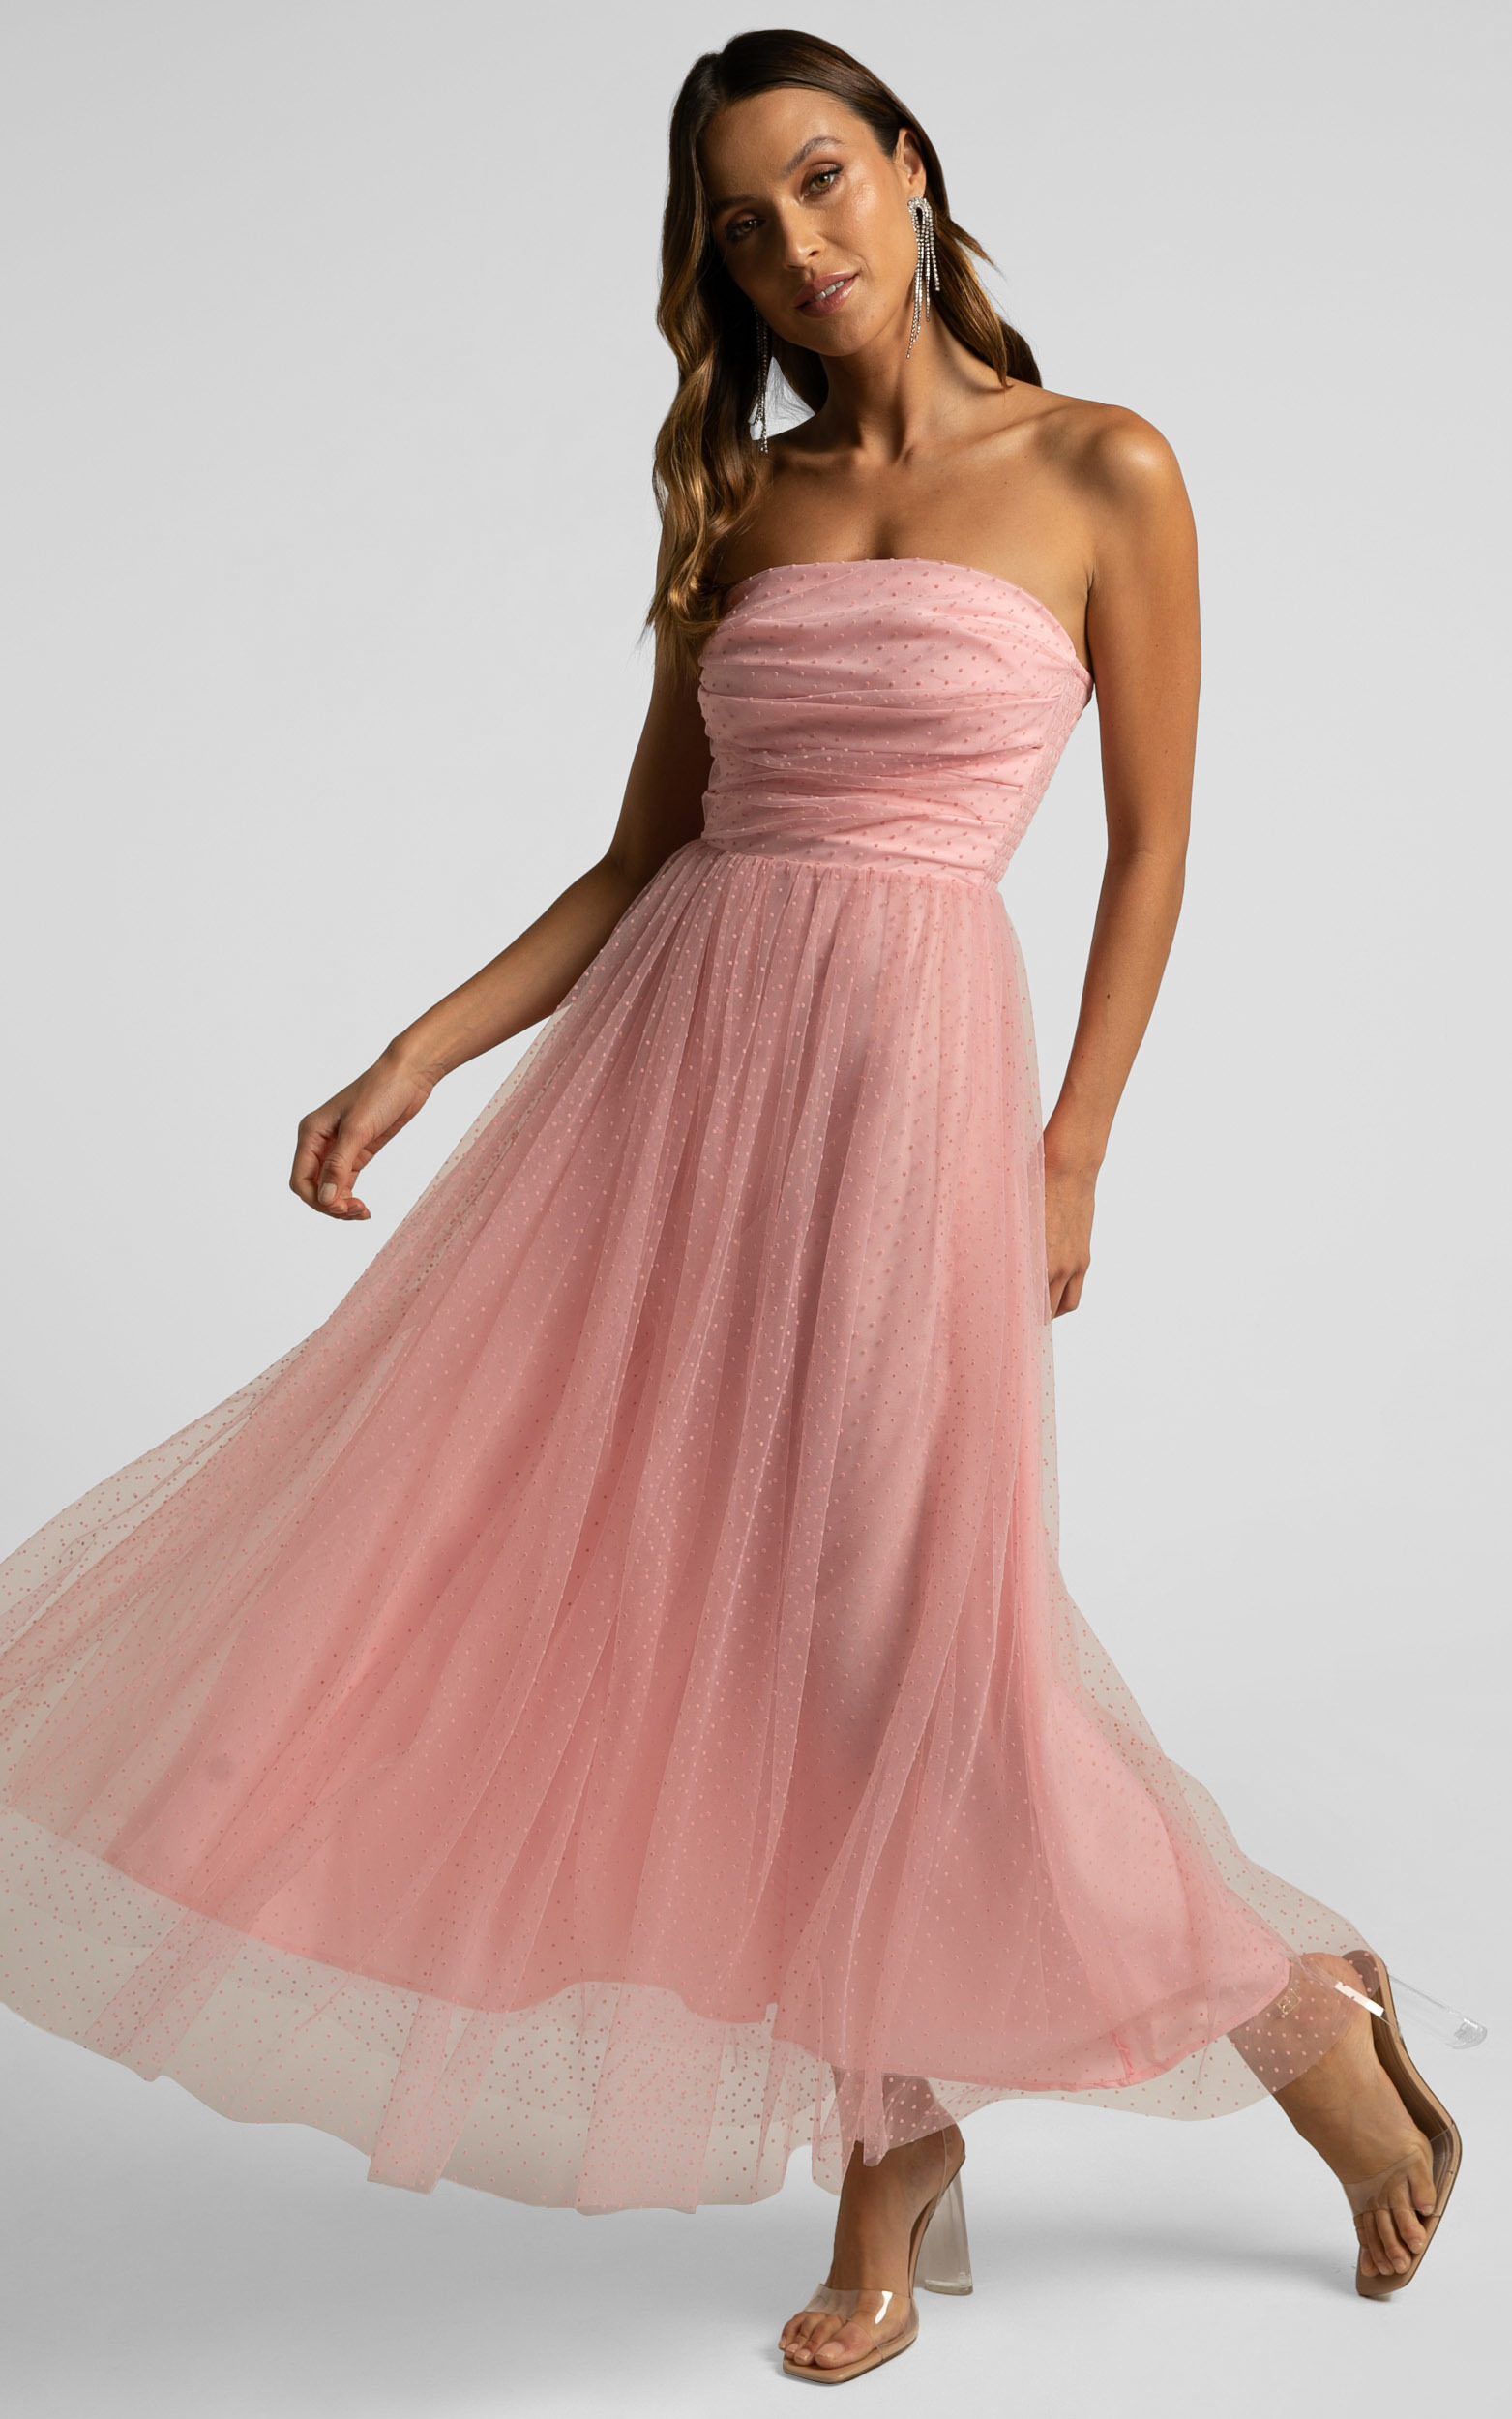 Jesslou Strapless Ruched Bodice Tulle Midi Dress in Pale Pink - 04, PNK1, hi-res image number null